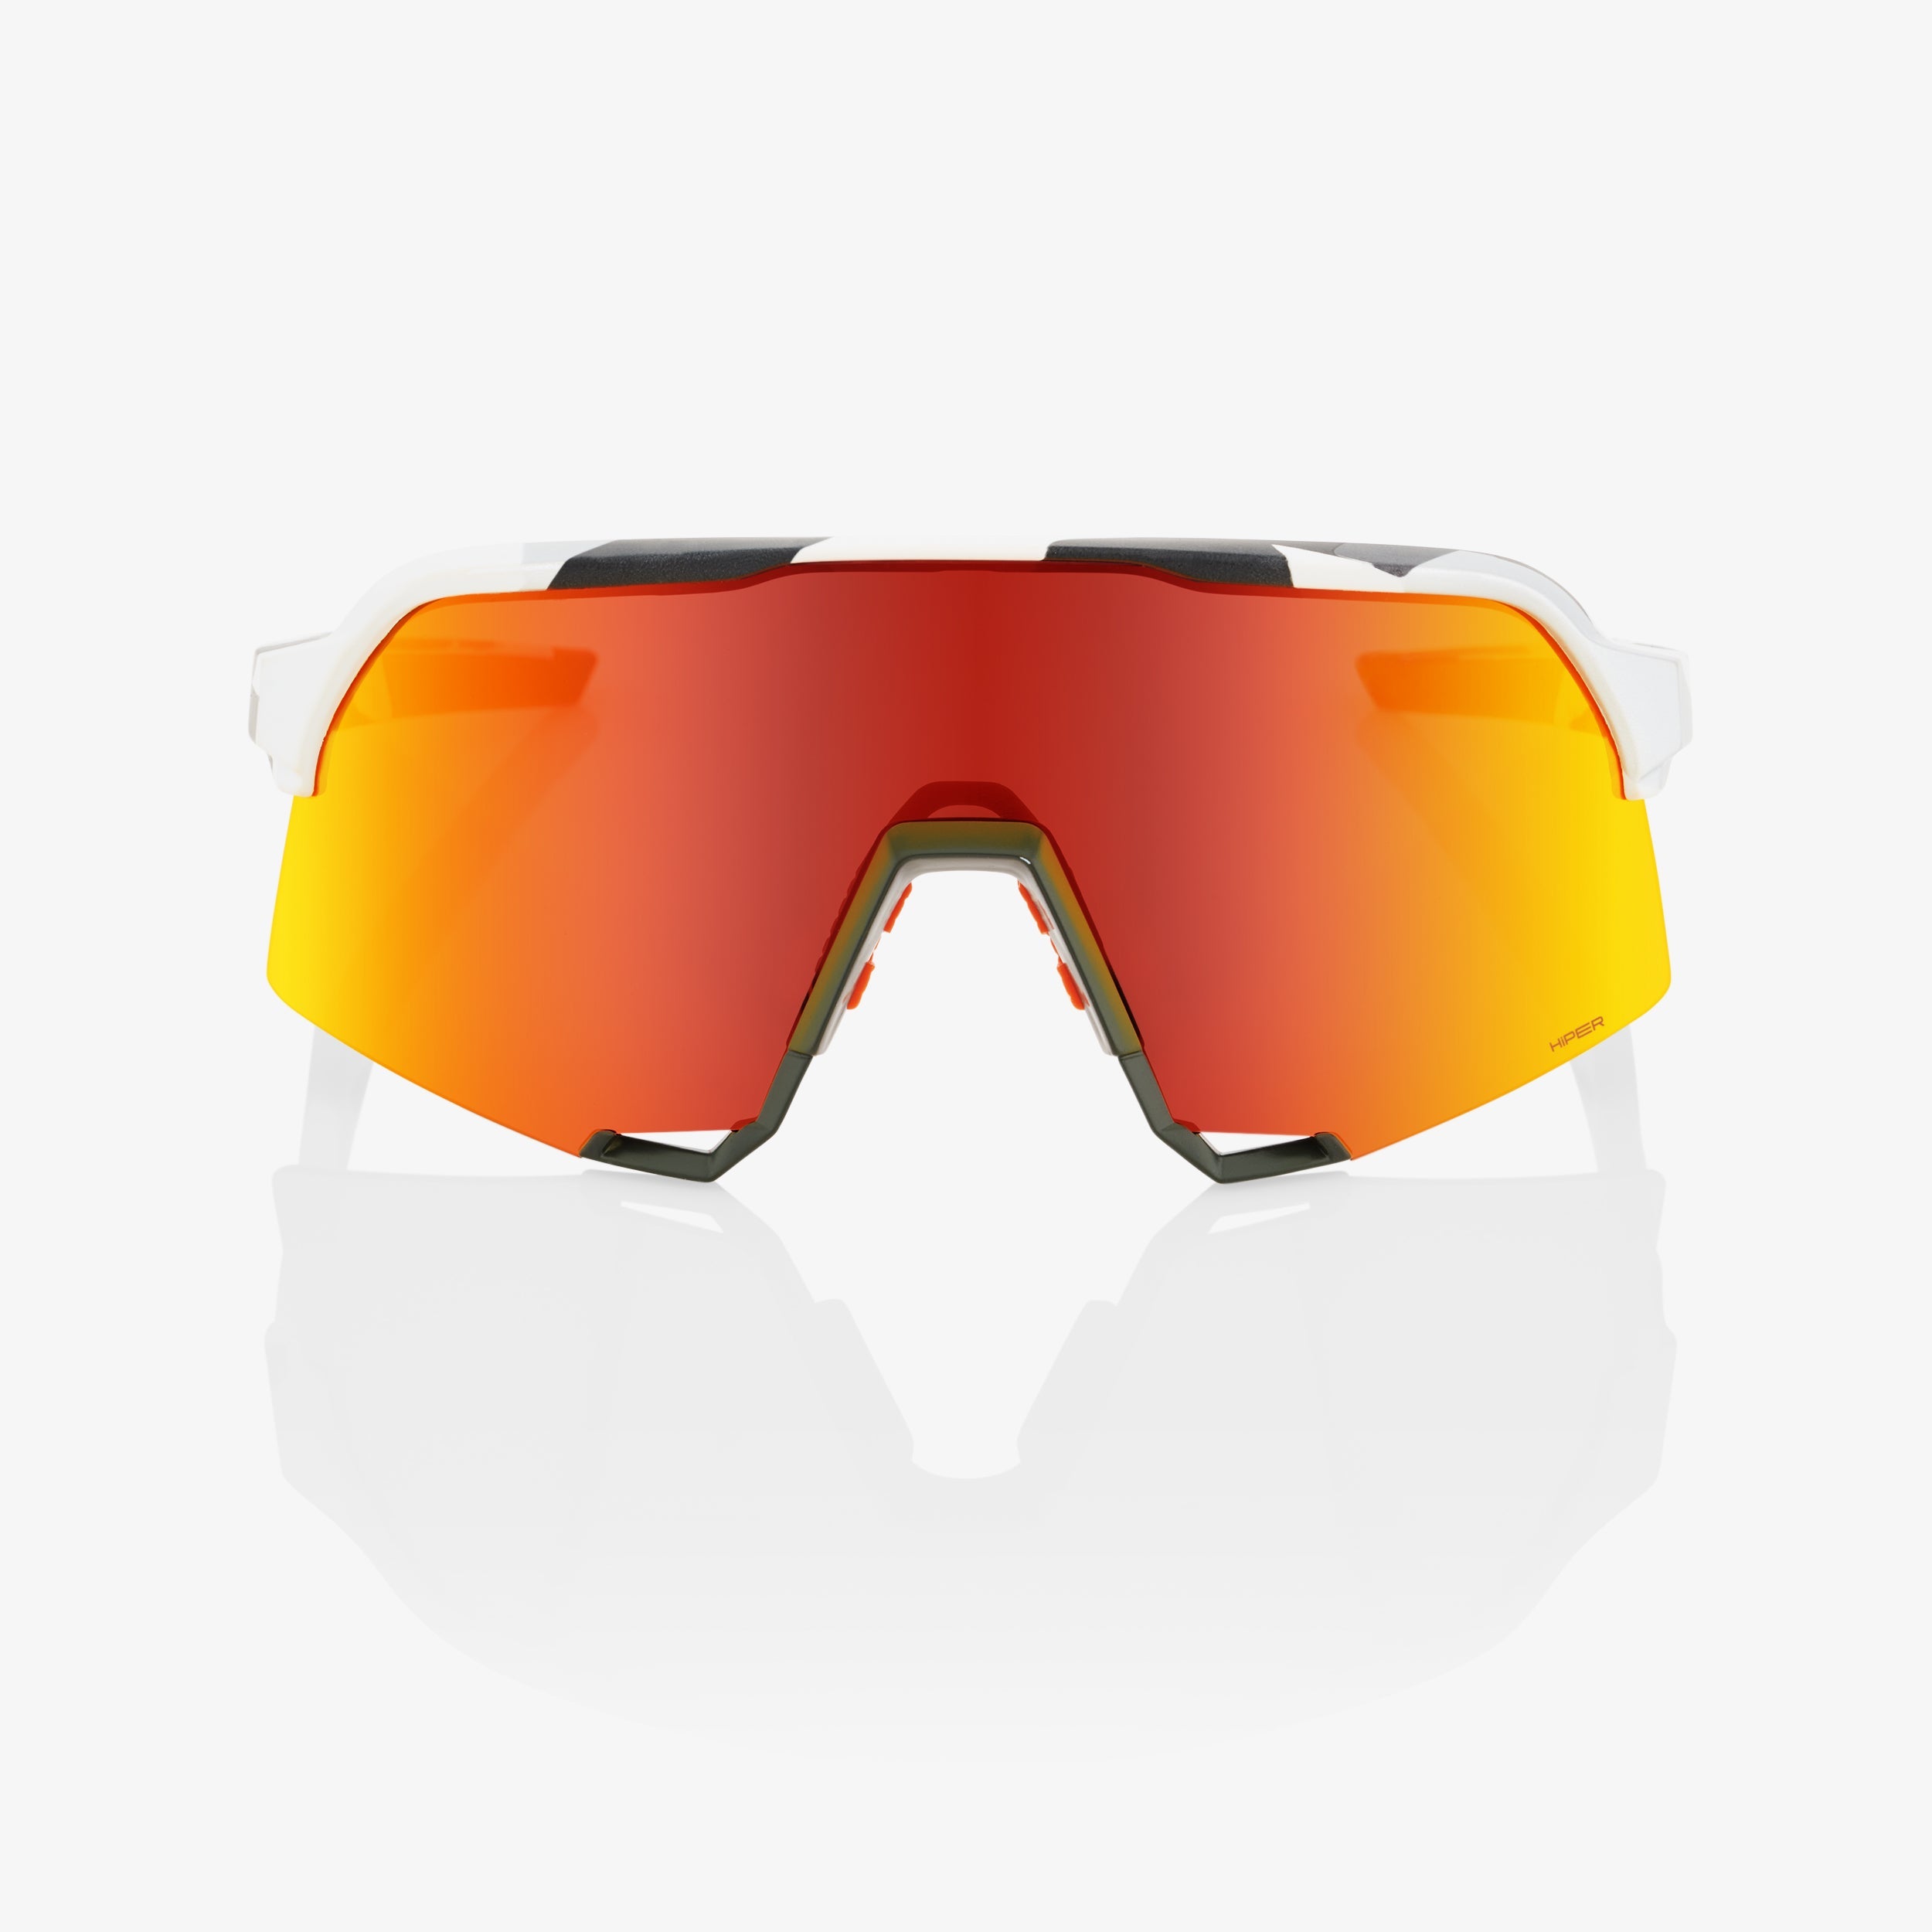 S3 - Soft Tact Grey Camo - HiPER® Red Multilayer Mirror Lens